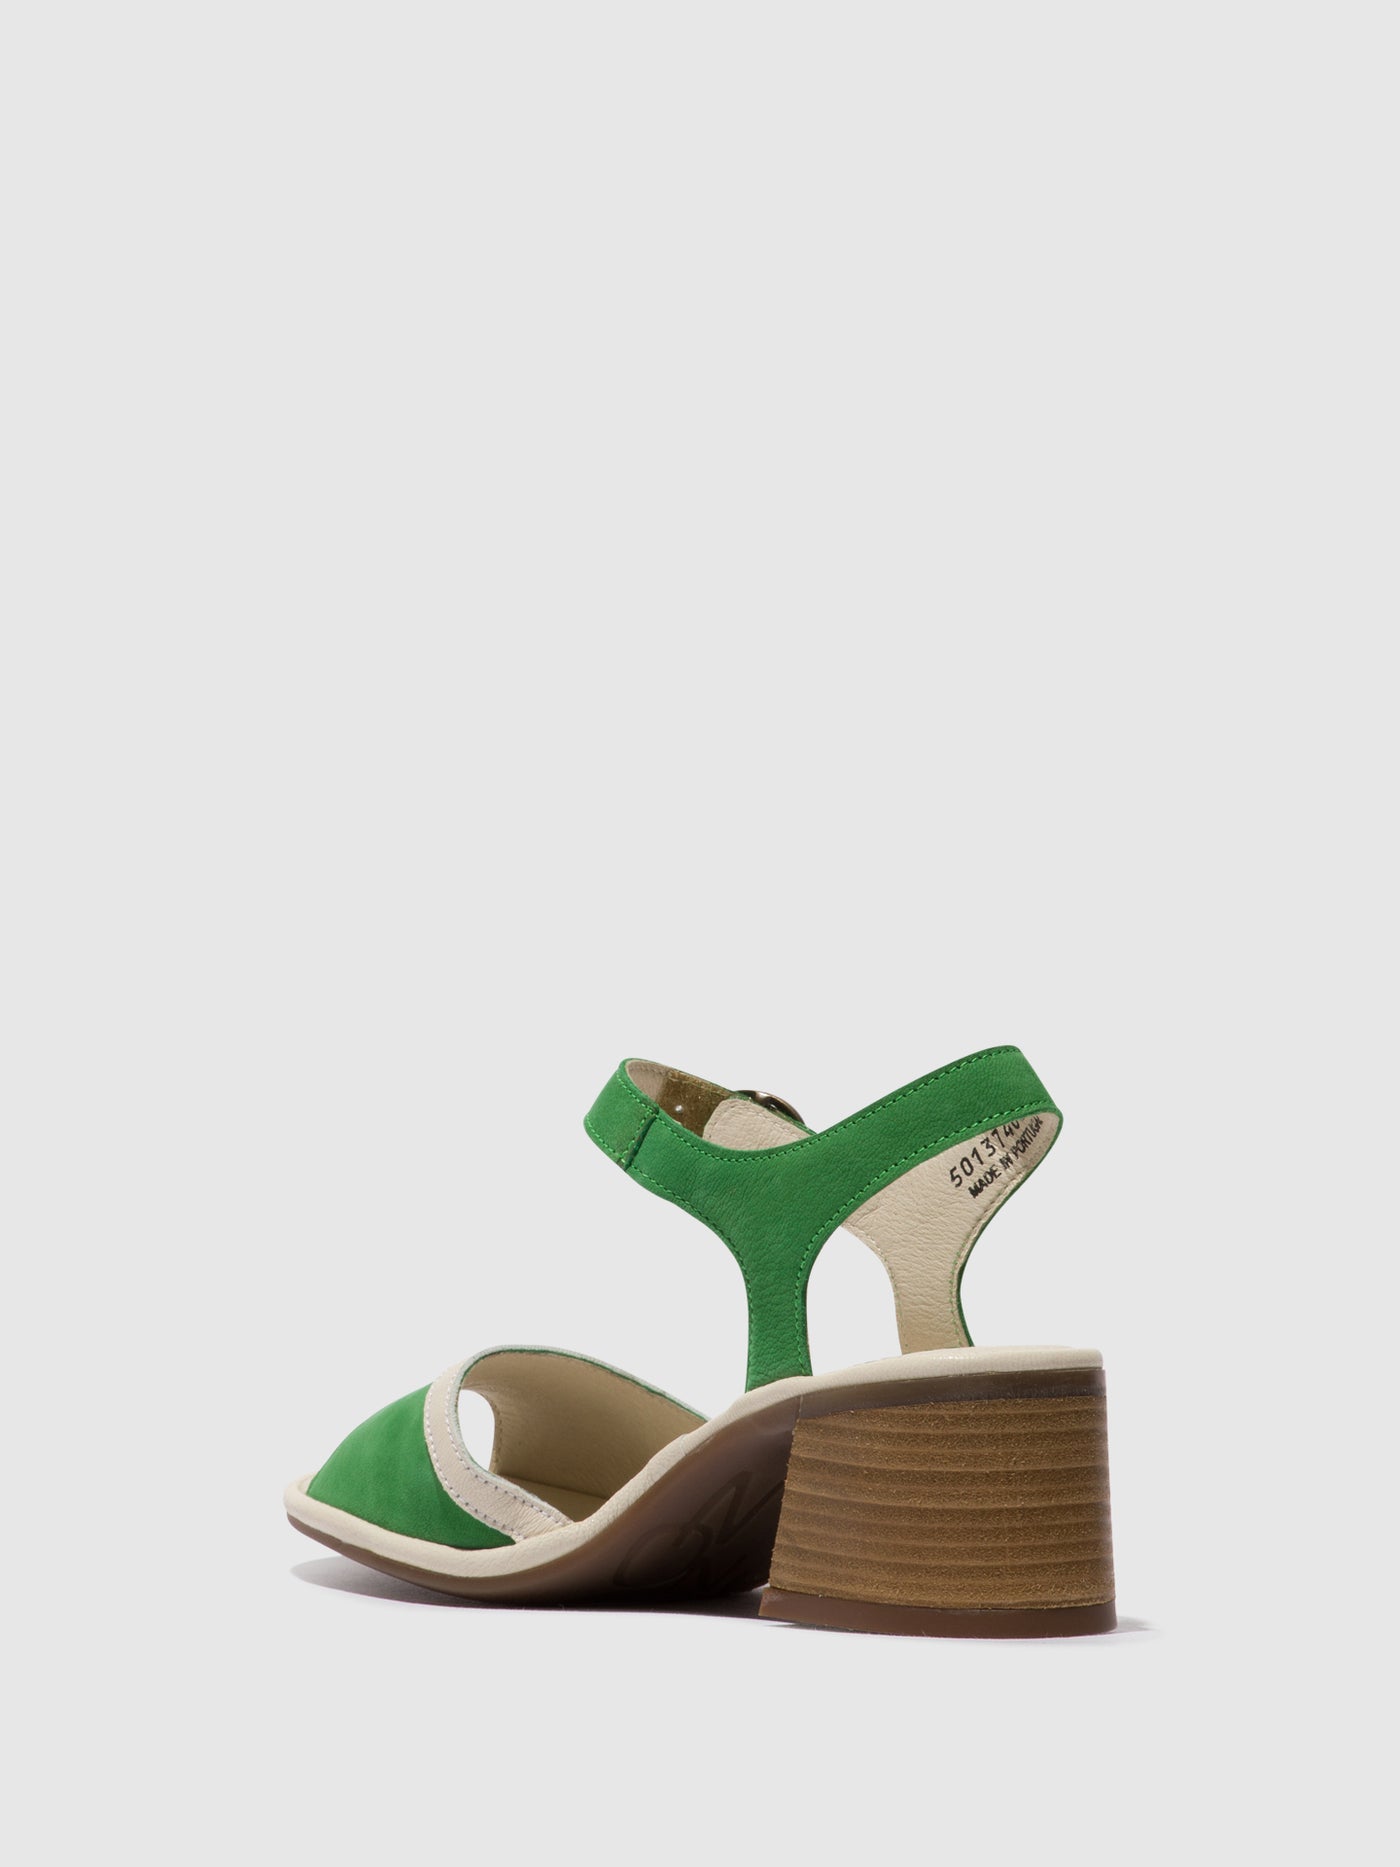 Ankle Strap Sandals LEAR374FLY LIGHT GREEN/OFFWHITE